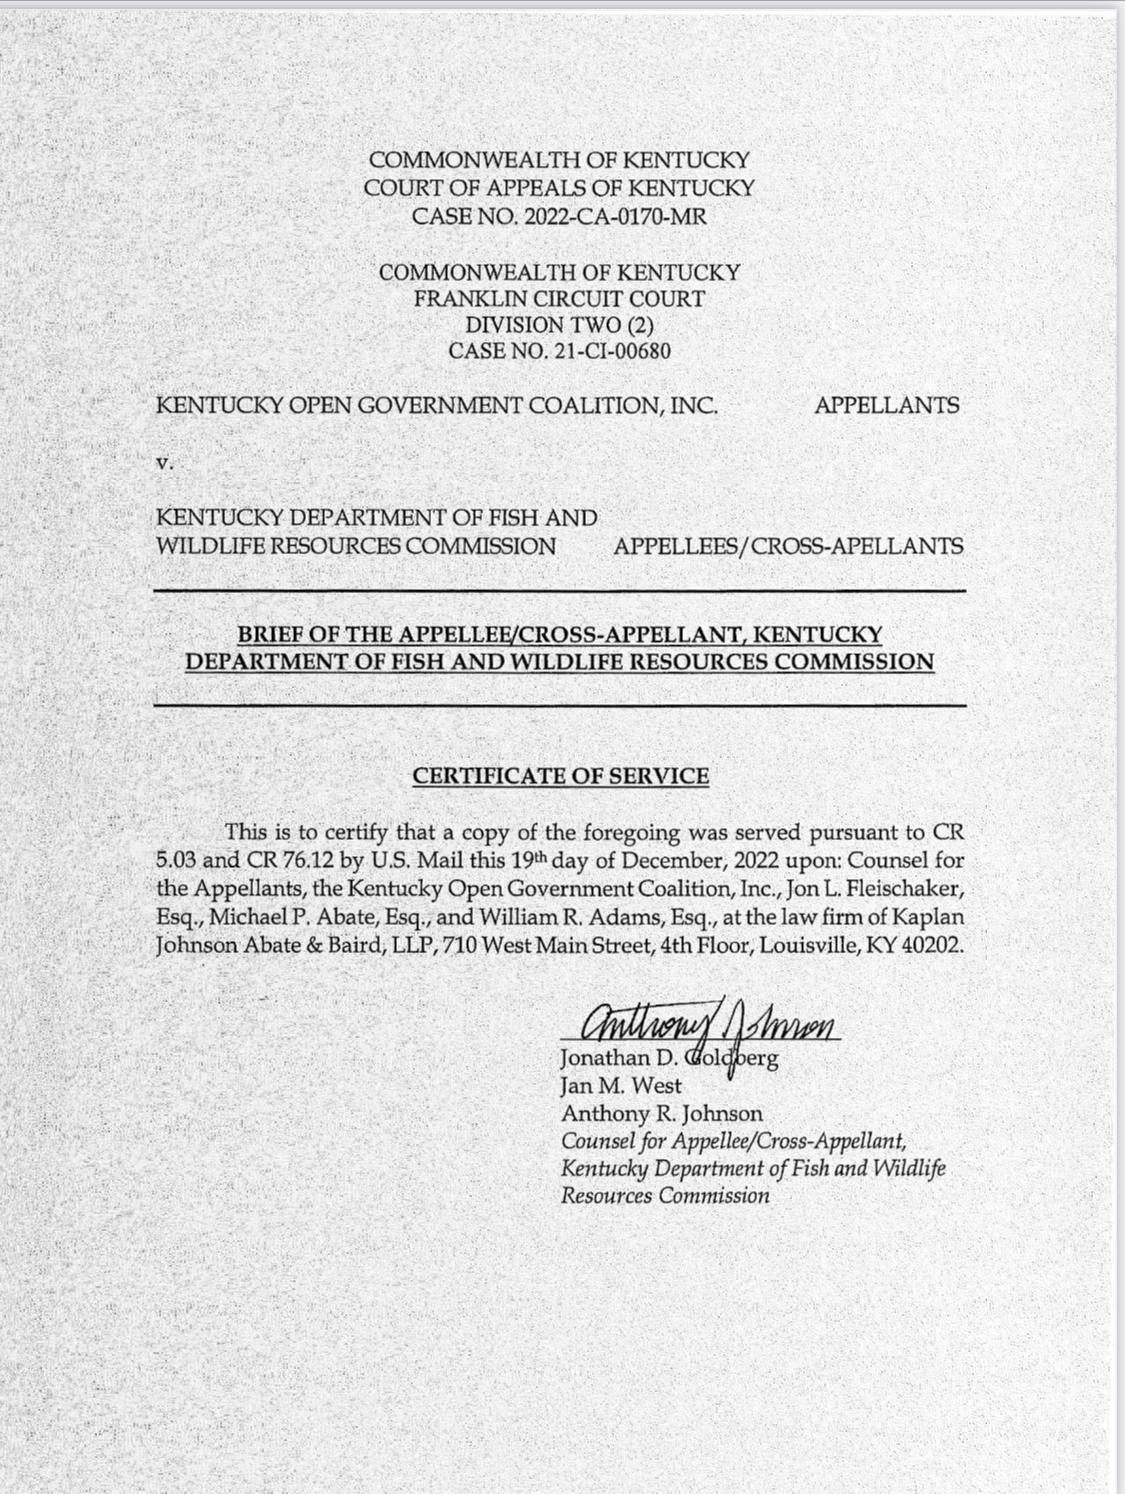 Cover page of Commission’s appellate brief